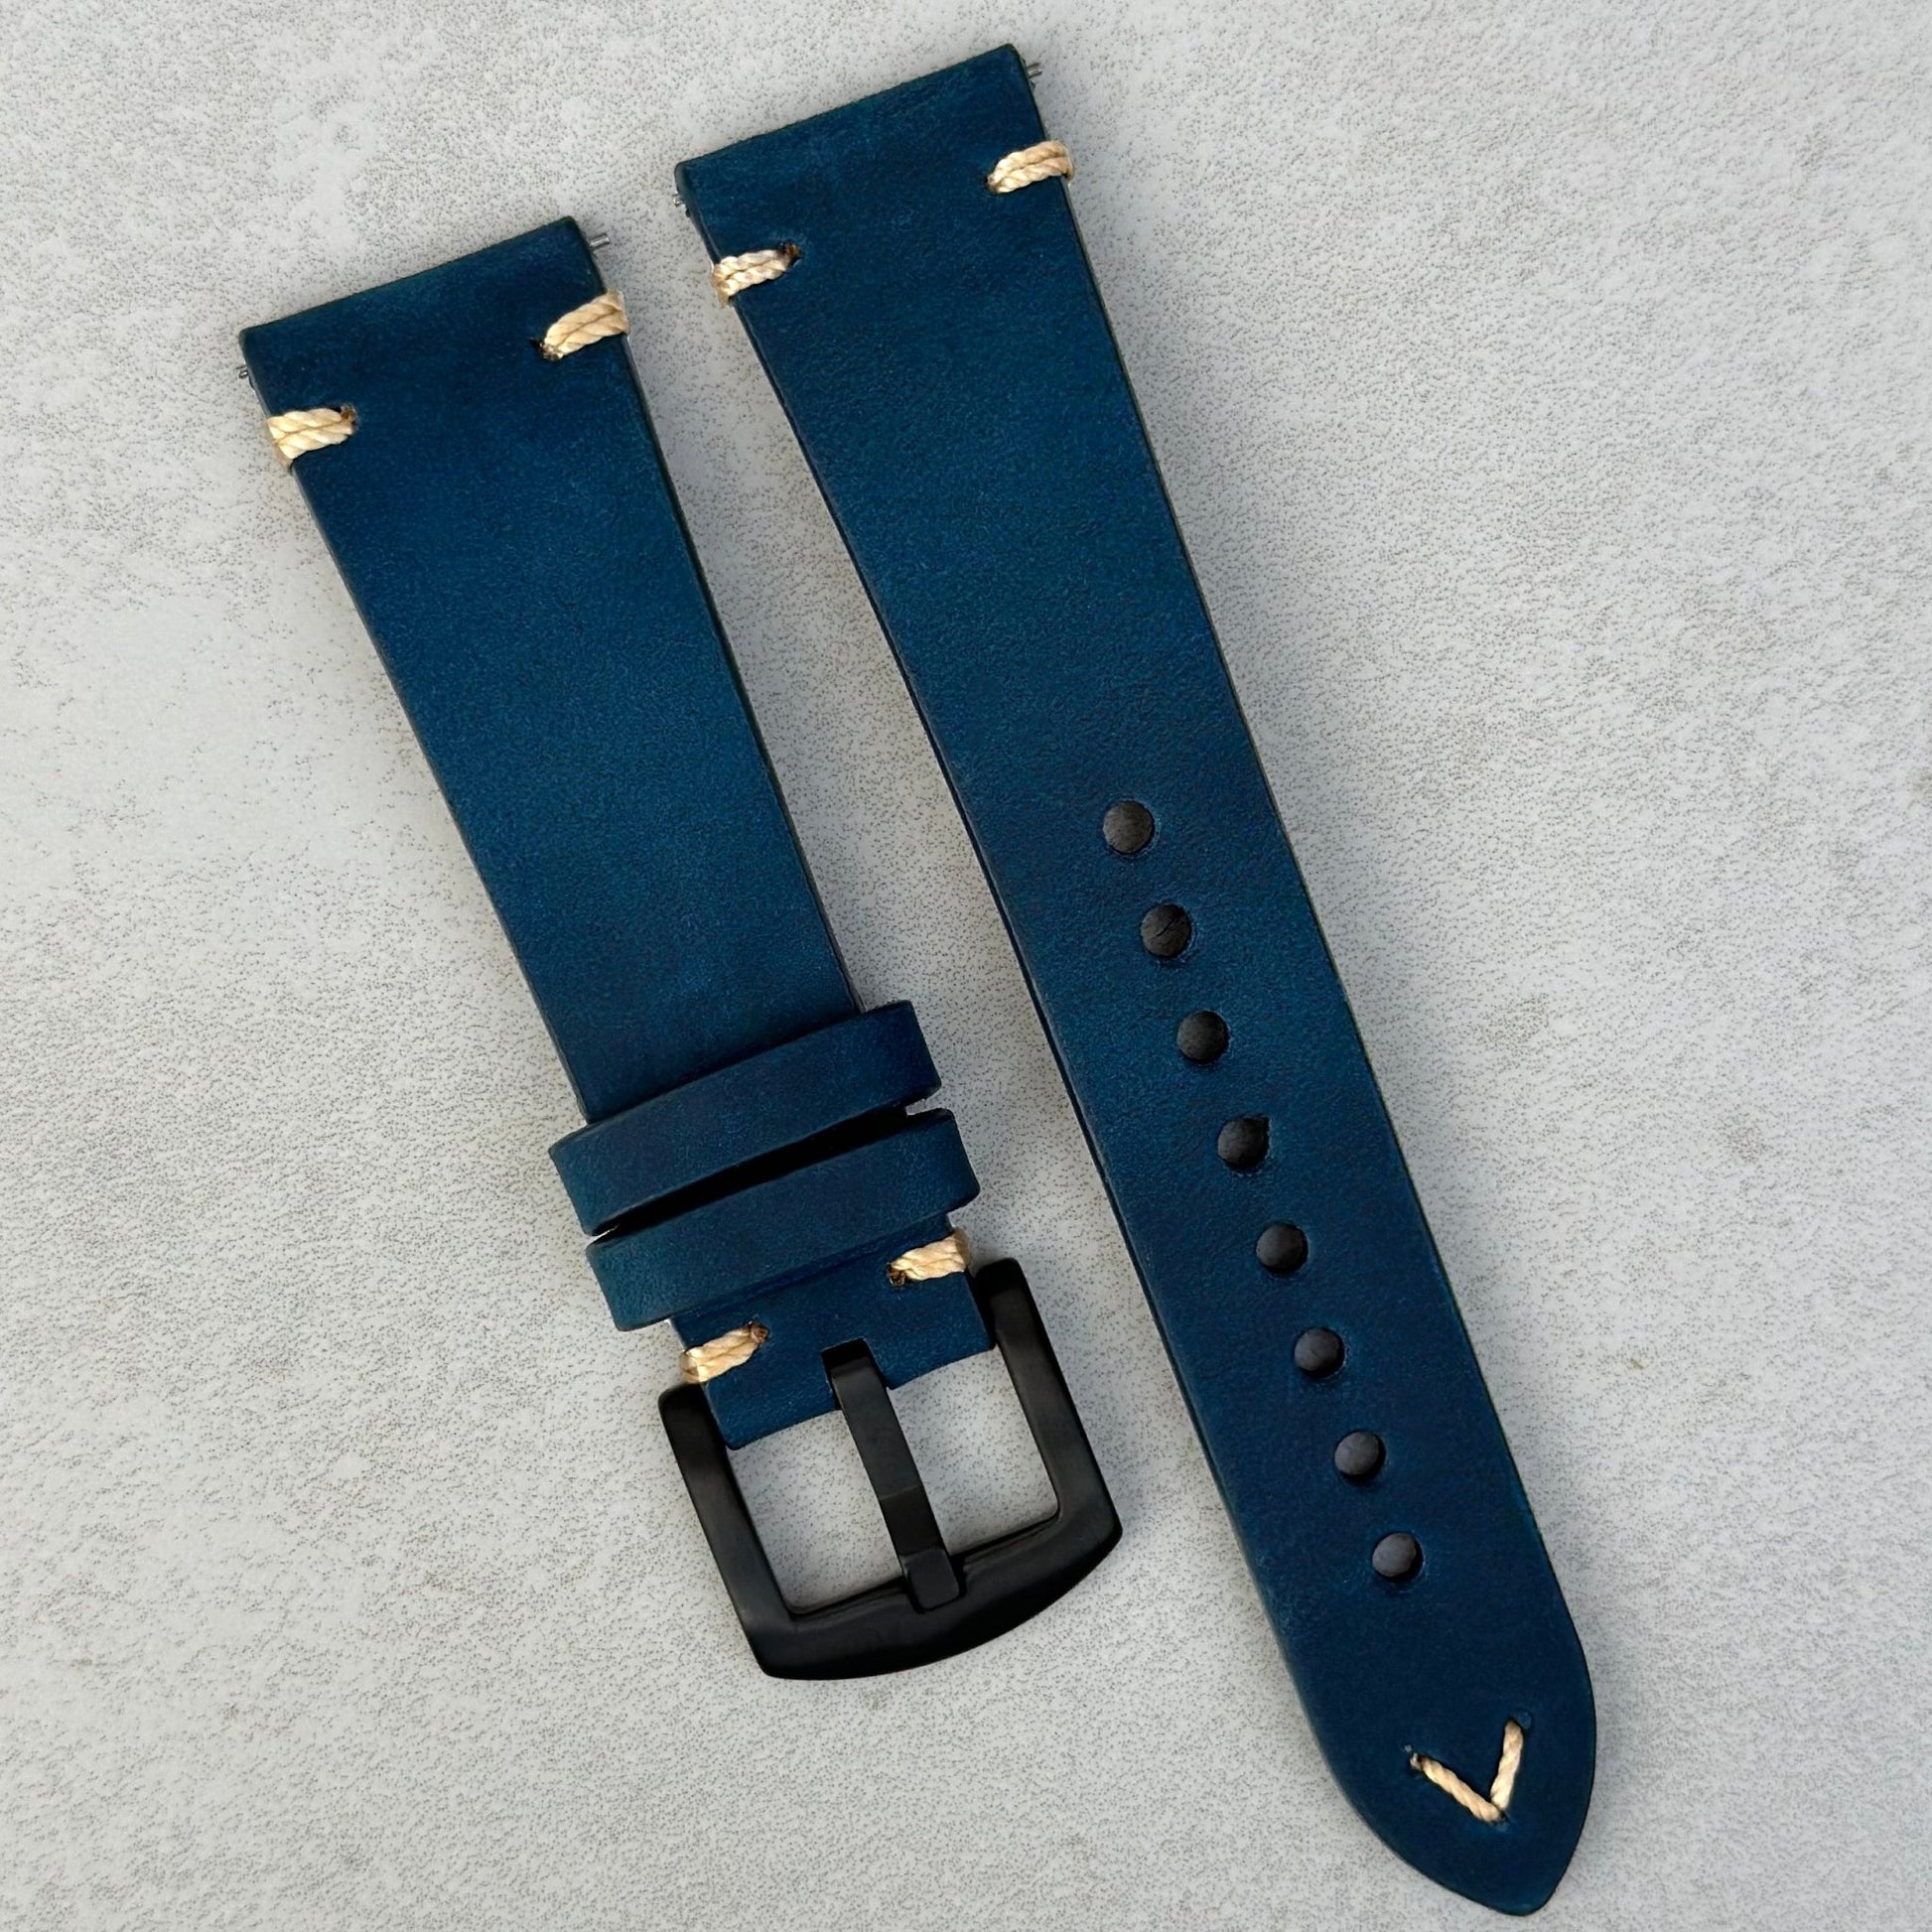 Madrid midnight blue full grain leather watch strap. PVD black 316L stainless steel buckle. Contrast ivory stitching.